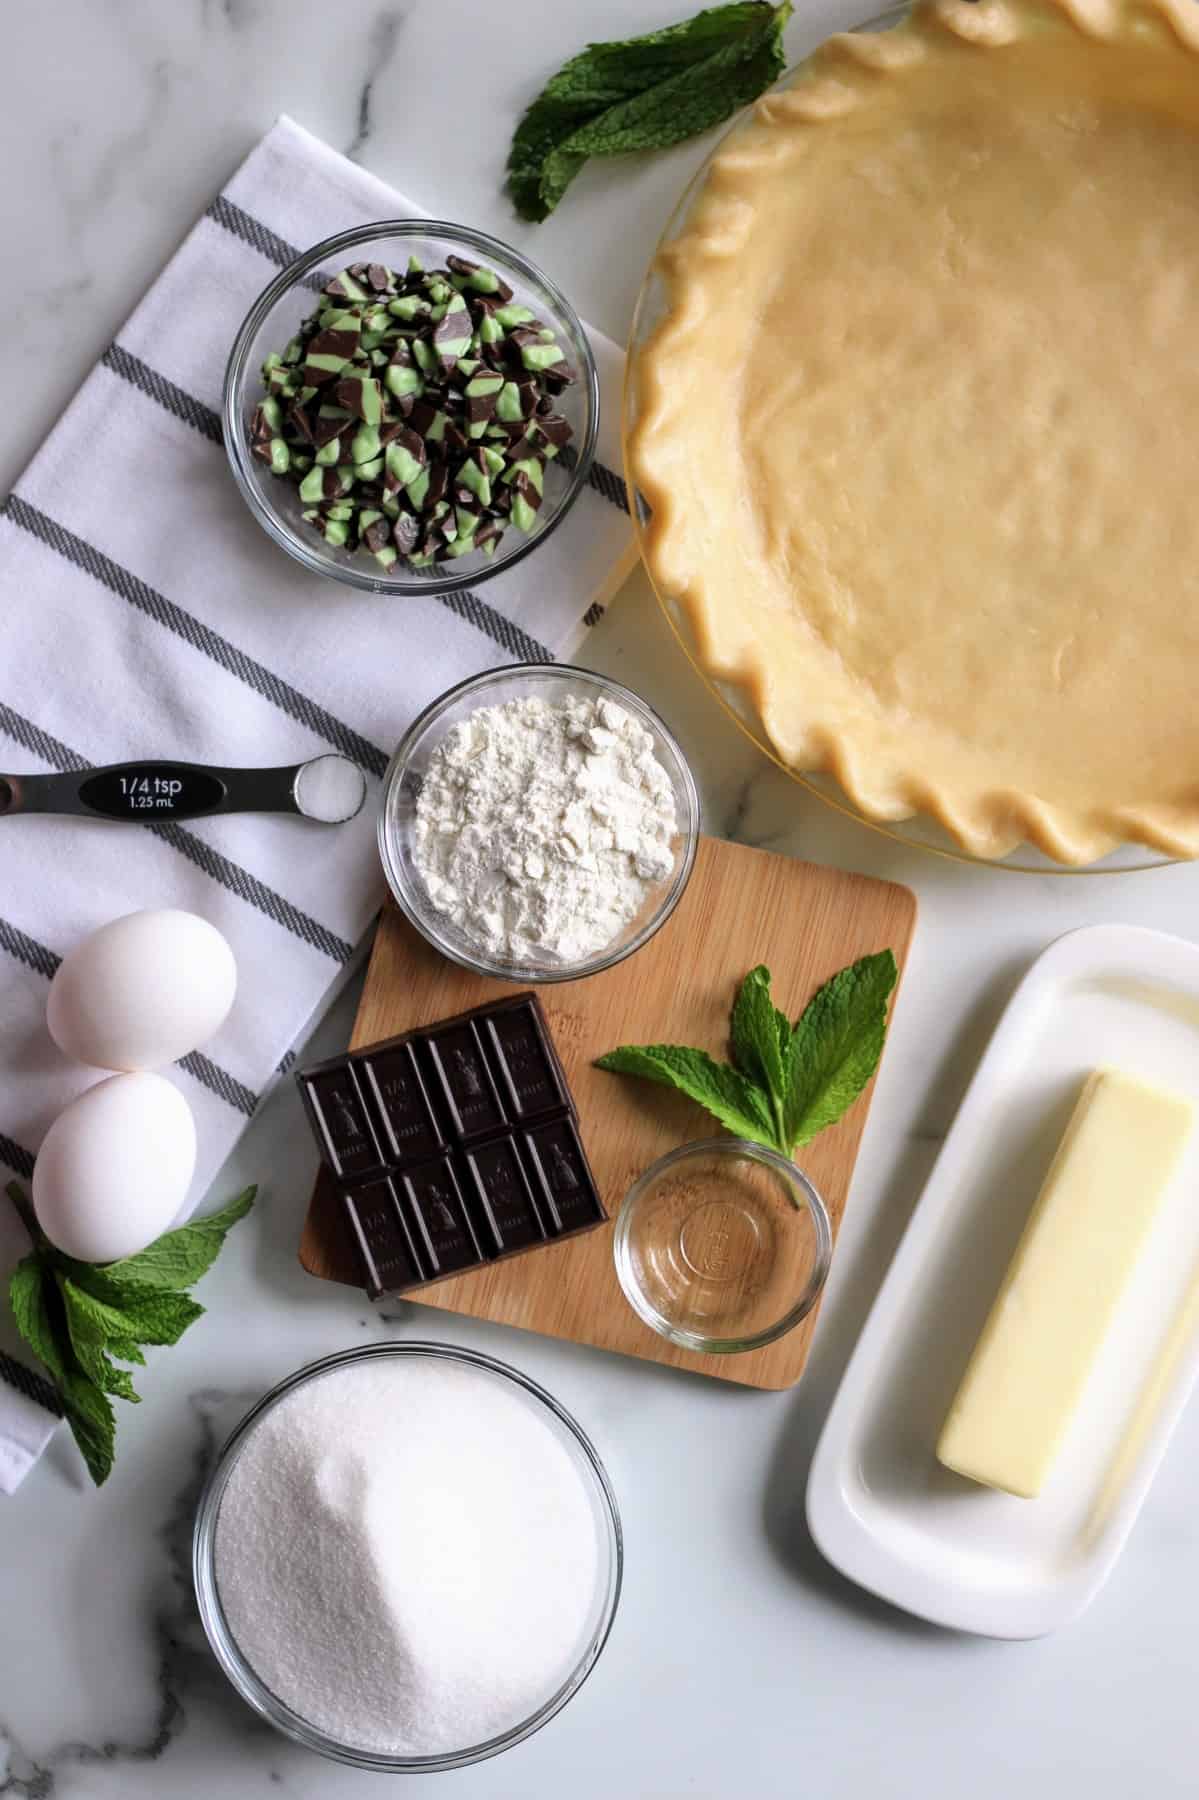 Ingredients for Mint Chocolate Pie